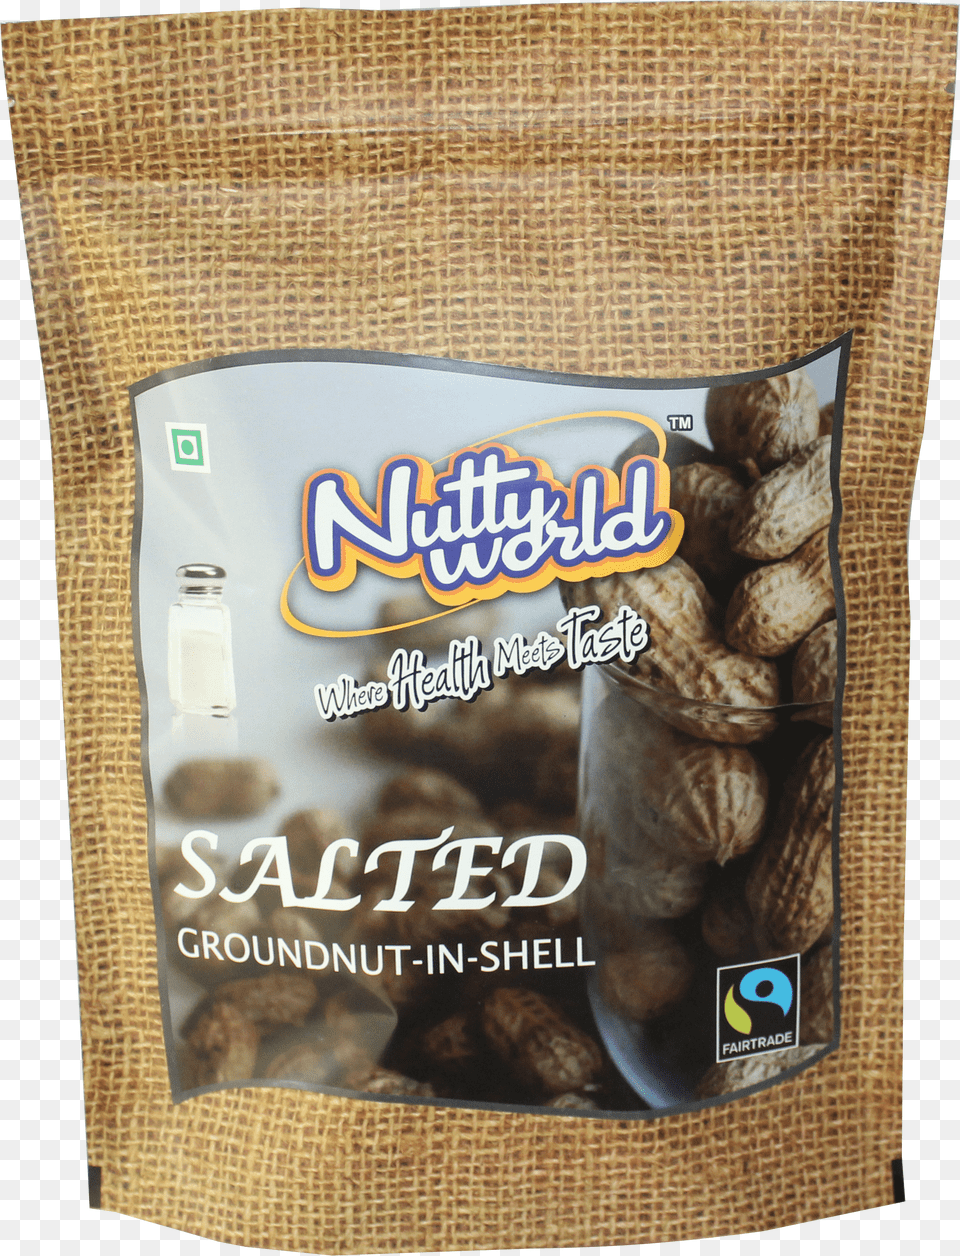 Buy Nuttyworld In Shell Salted Groundnut Online At Walnut, Food, Nut, Plant, Produce Free Png